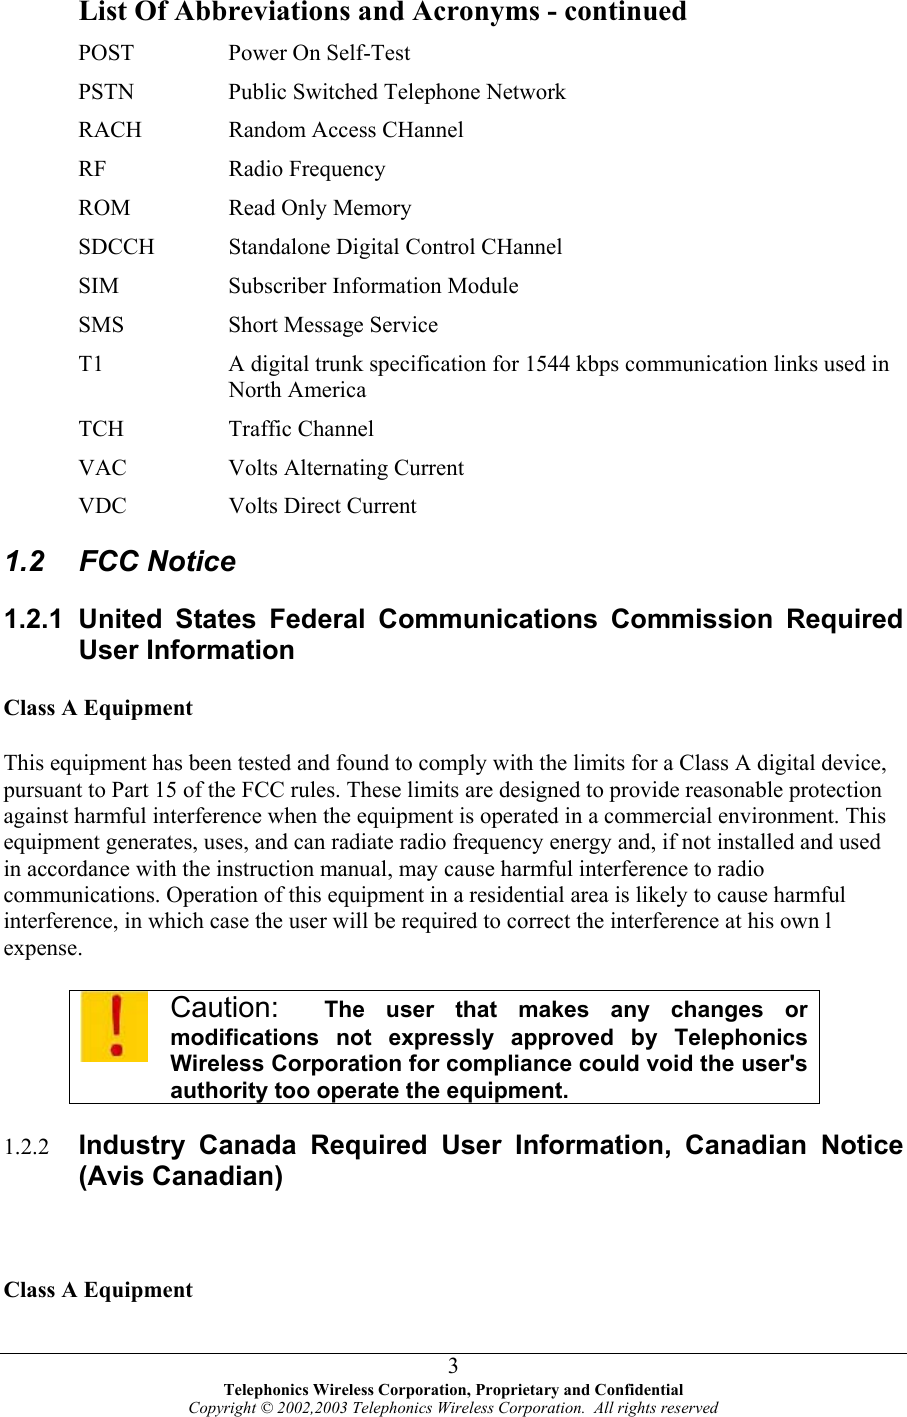  List Of Abbreviations and Acronyms - continued POST  Power On Self-Test PSTN  Public Switched Telephone Network RACH  Random Access CHannel RF Radio Frequency ROM  Read Only Memory SDCCH       Standalone Digital Control CHannel SIM  Subscriber Information Module SMS  Short Message Service T1  A digital trunk specification for 1544 kbps communication links used in North America TCH Traffic Channel VAC  Volts Alternating Current VDC Volts Direct Current 1.2 FCC Notice 1.2.1 United States Federal Communications Commission Required User Information Class A Equipment This equipment has been tested and found to comply with the limits for a Class A digital device, pursuant to Part 15 of the FCC rules. These limits are designed to provide reasonable protection against harmful interference when the equipment is operated in a commercial environment. This equipment generates, uses, and can radiate radio frequency energy and, if not installed and used in accordance with the instruction manual, may cause harmful interference to radio communications. Operation of this equipment in a residential area is likely to cause harmful interference, in which case the user will be required to correct the interference at his own l expense.  Caution:  The user that makes any changes or  modifications not expressly approved by Telephonics  Wireless Corporation for compliance could void the user&apos;s authority too operate the equipment. 1.2.2  Industry Canada Required User Information, Canadian Notice (Avis Canadian)  Class A Equipment  Telephonics Wireless Corporation, Proprietary and Confidential Copyright © 2002,2003 Telephonics Wireless Corporation.  All rights reserved 3